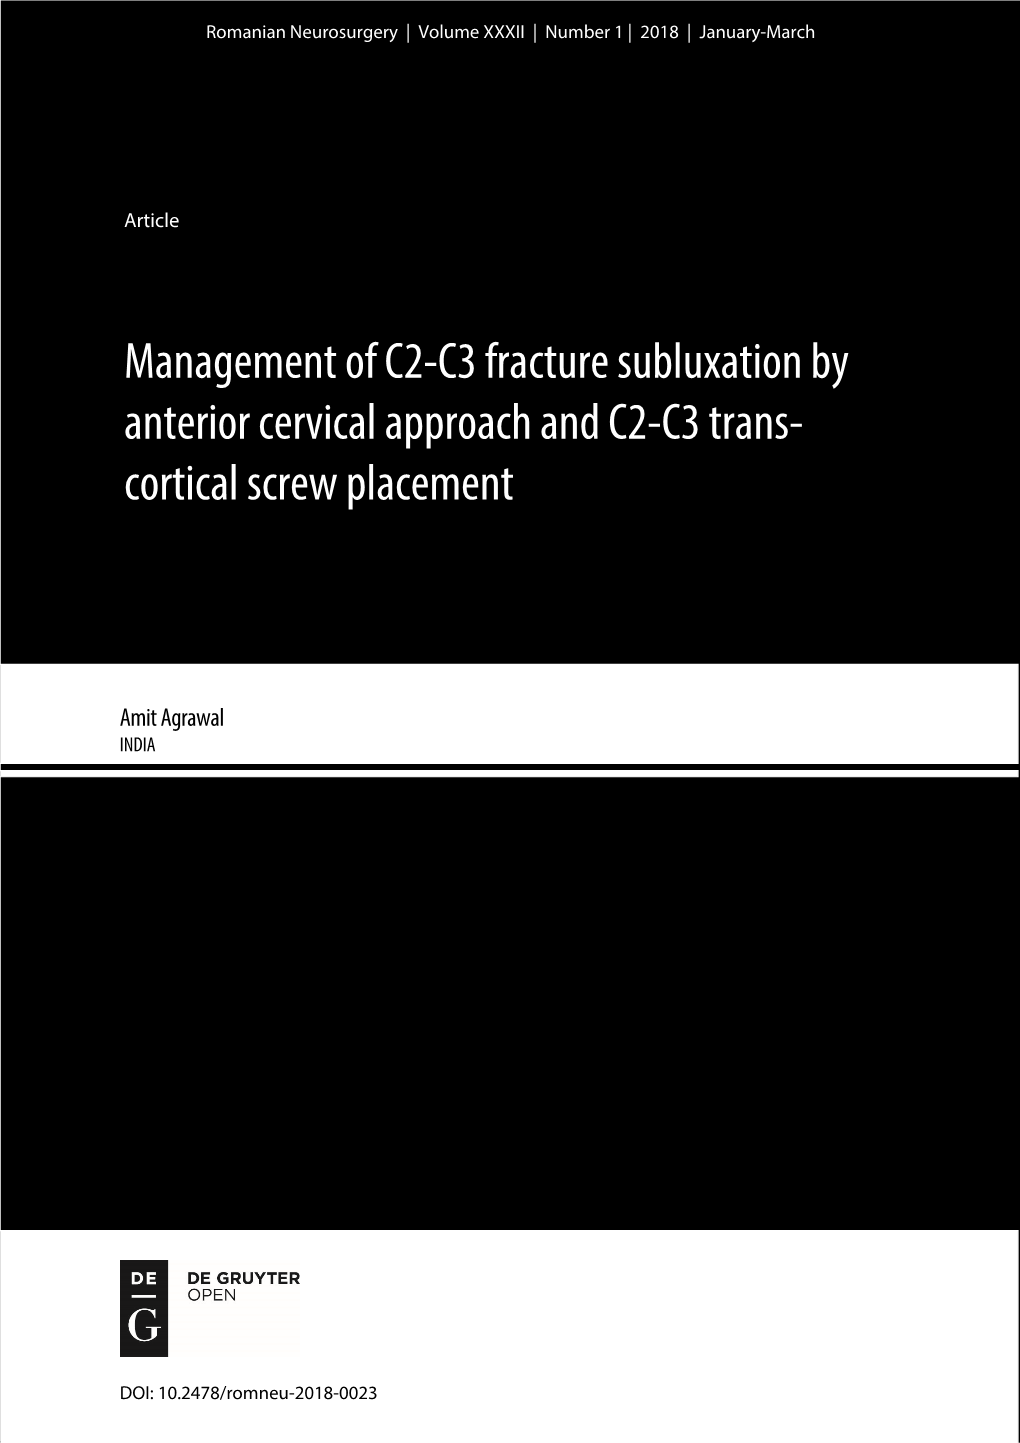 Management of C2-C3 Fracture Subluxation by Anterior Cervical Approach and C2-C3 Trans- Cortical Screw Placement